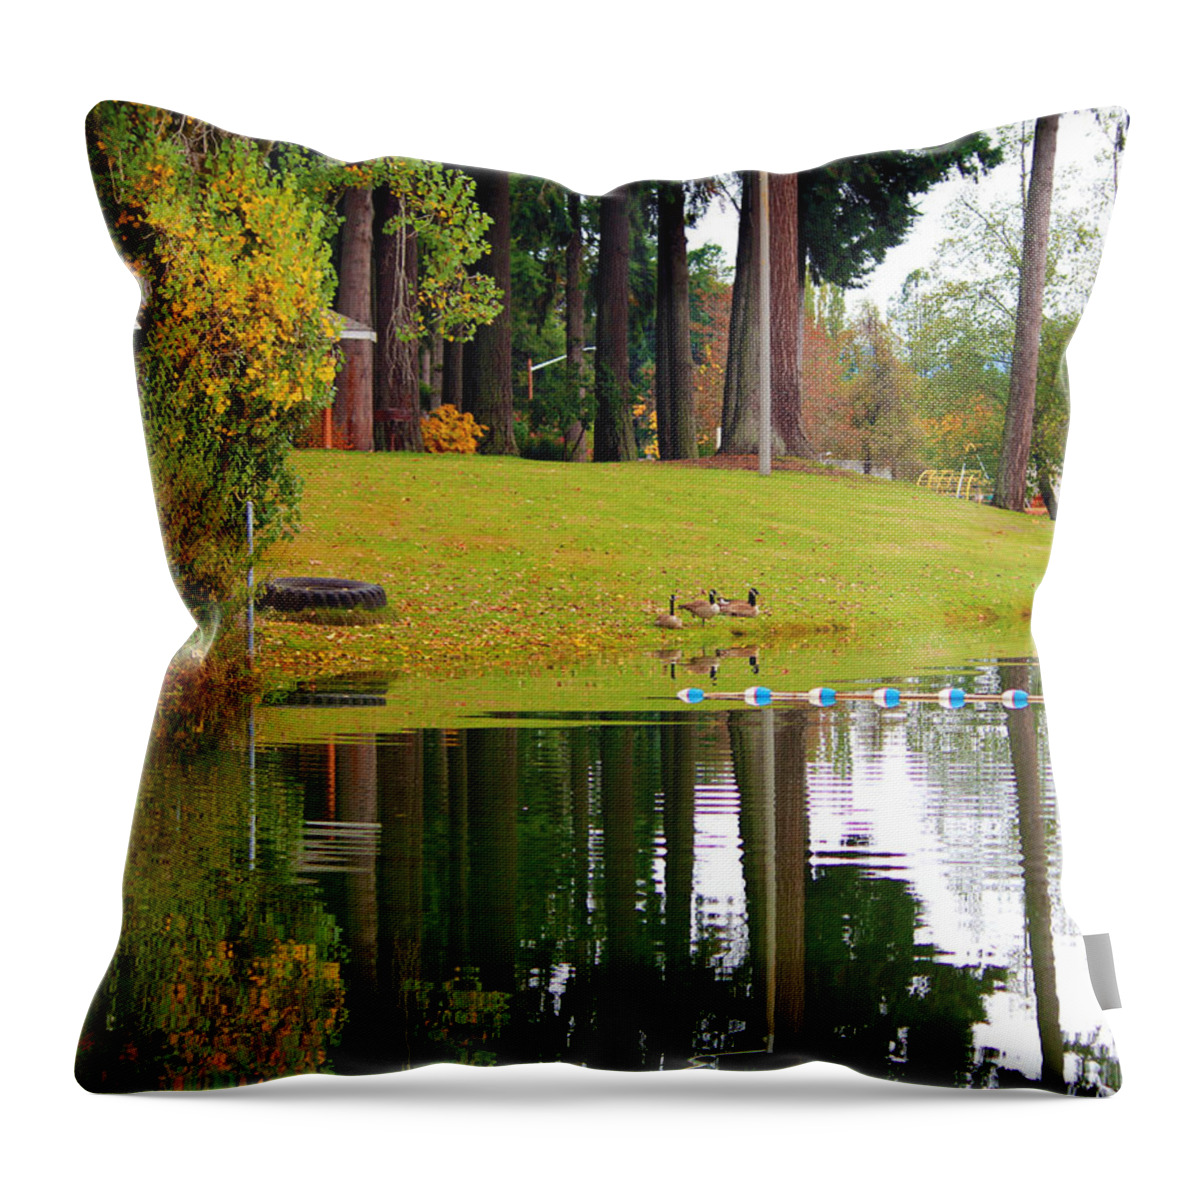 Lake Throw Pillow featuring the photograph Serene Scott Lake by Jeanette C Landstrom